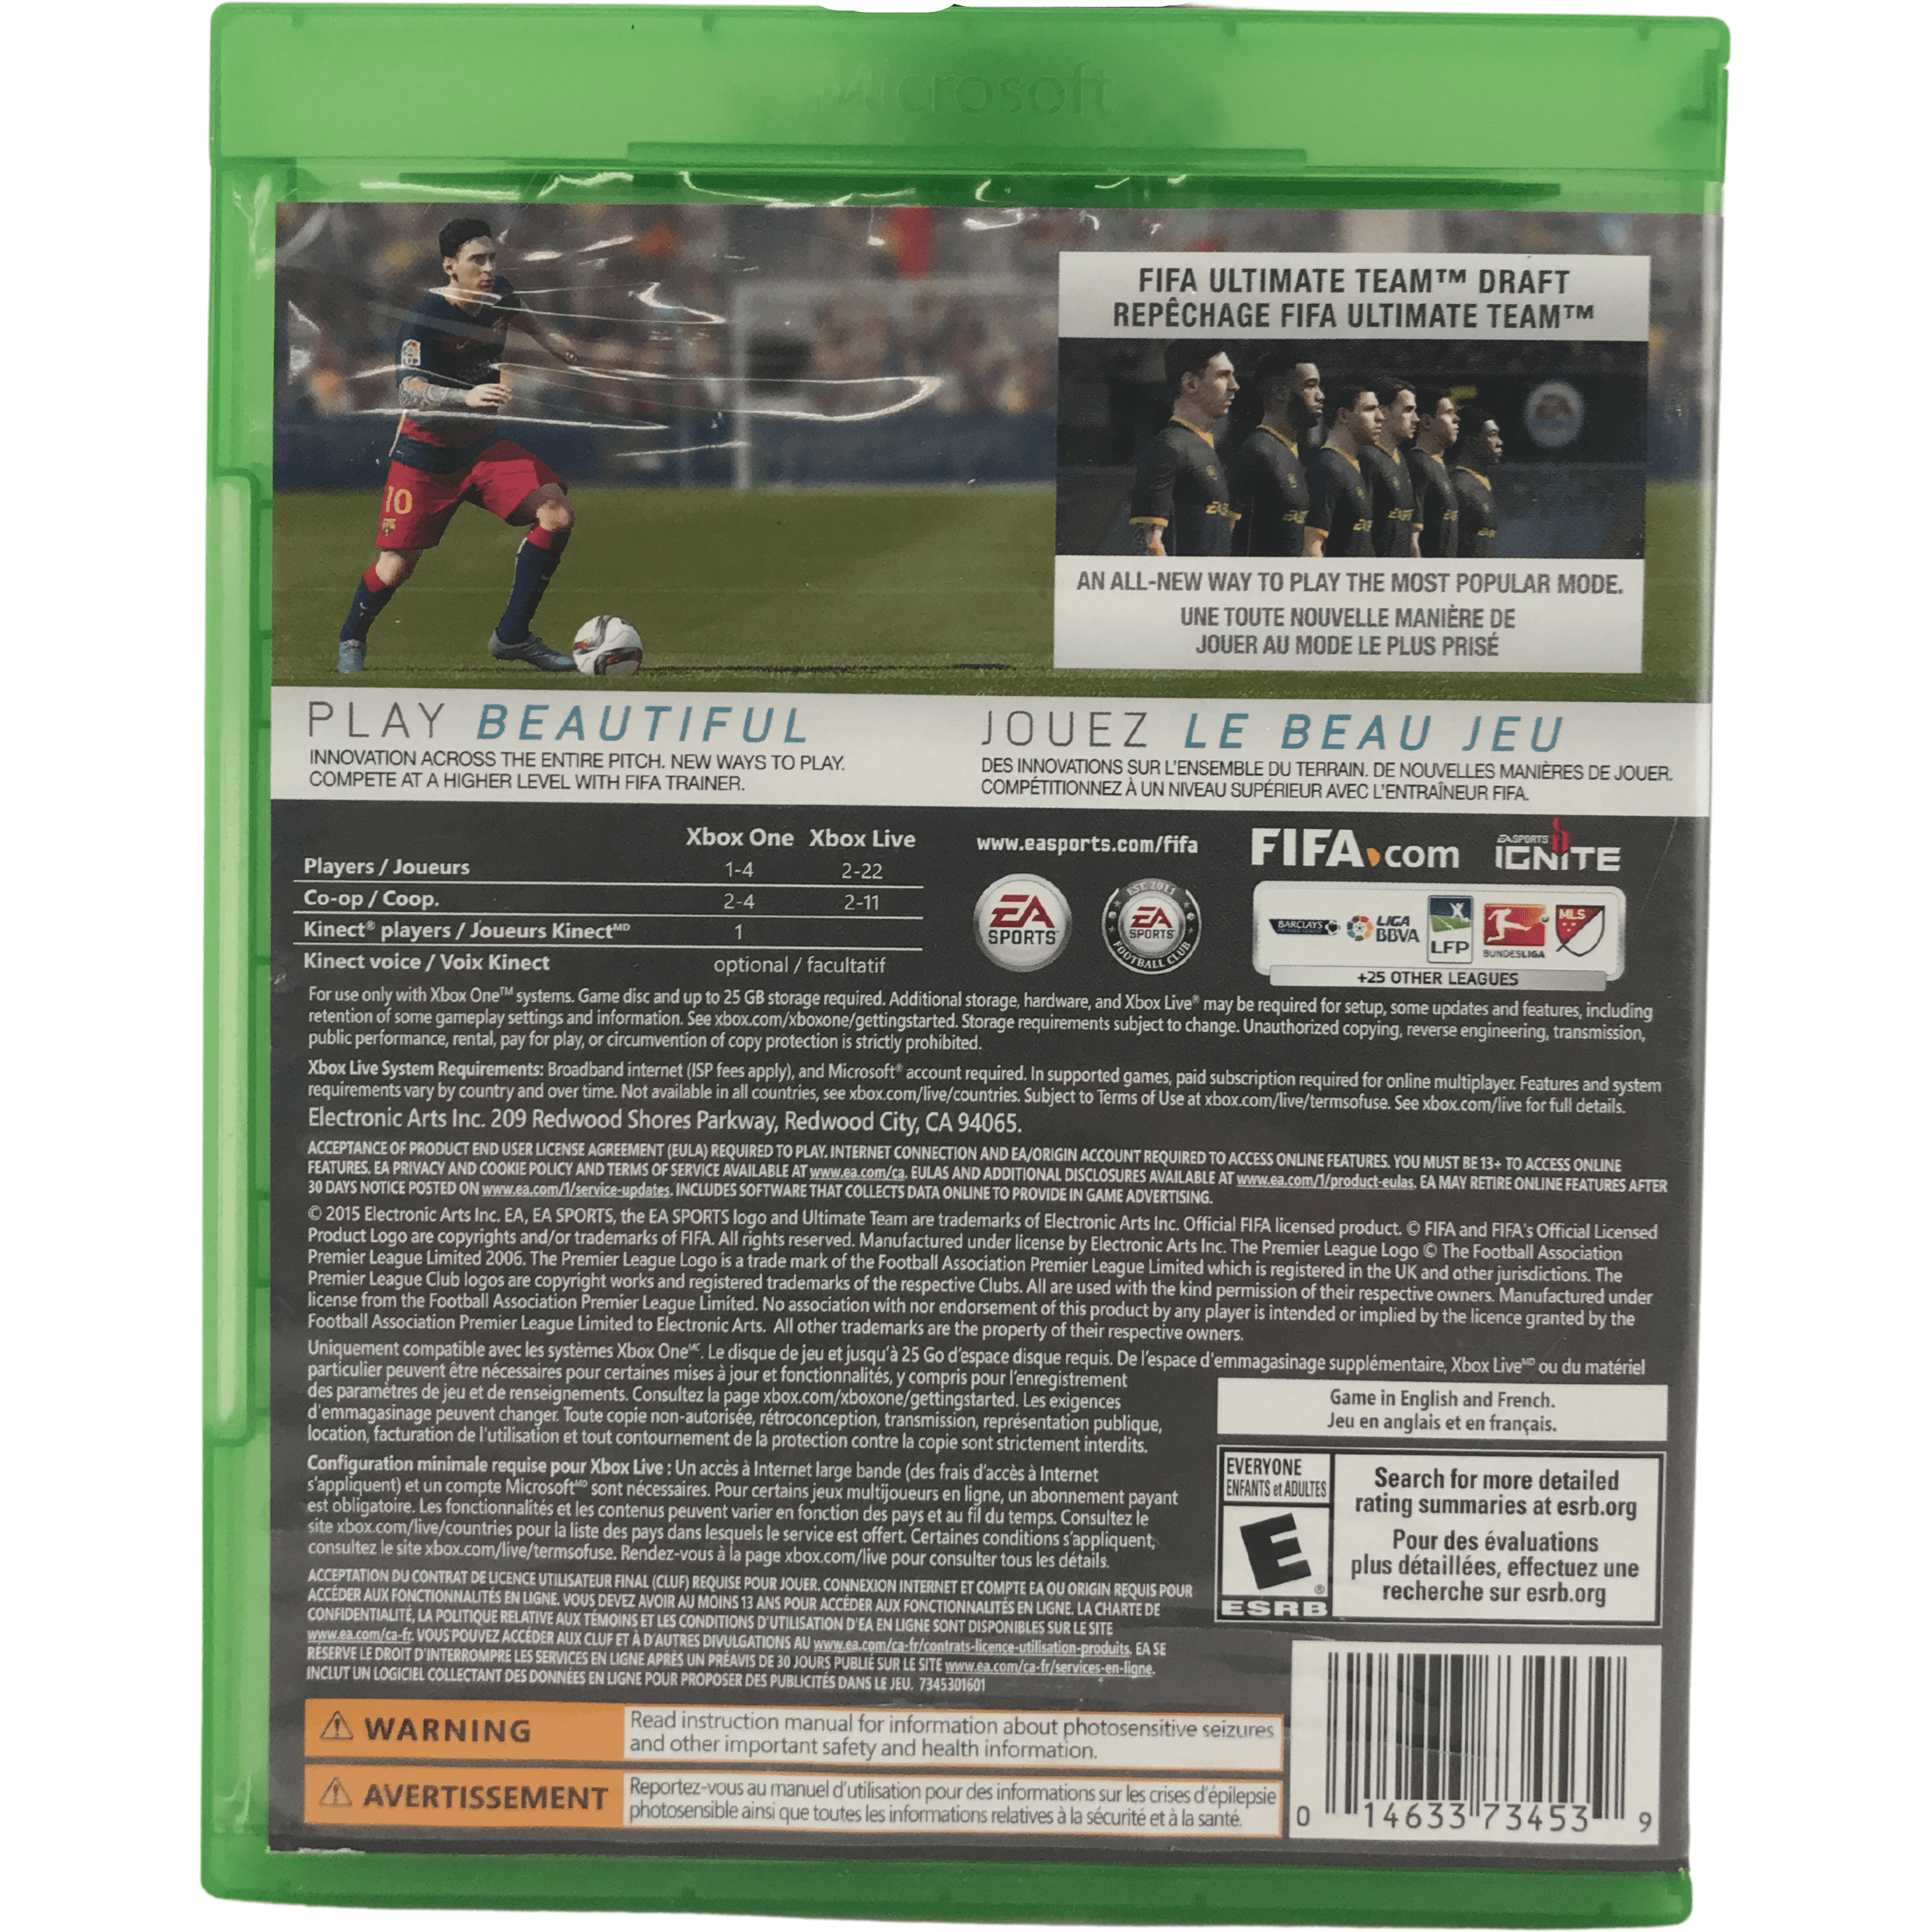 Xbox One "FIFA 16" Game: Video Game: Opened